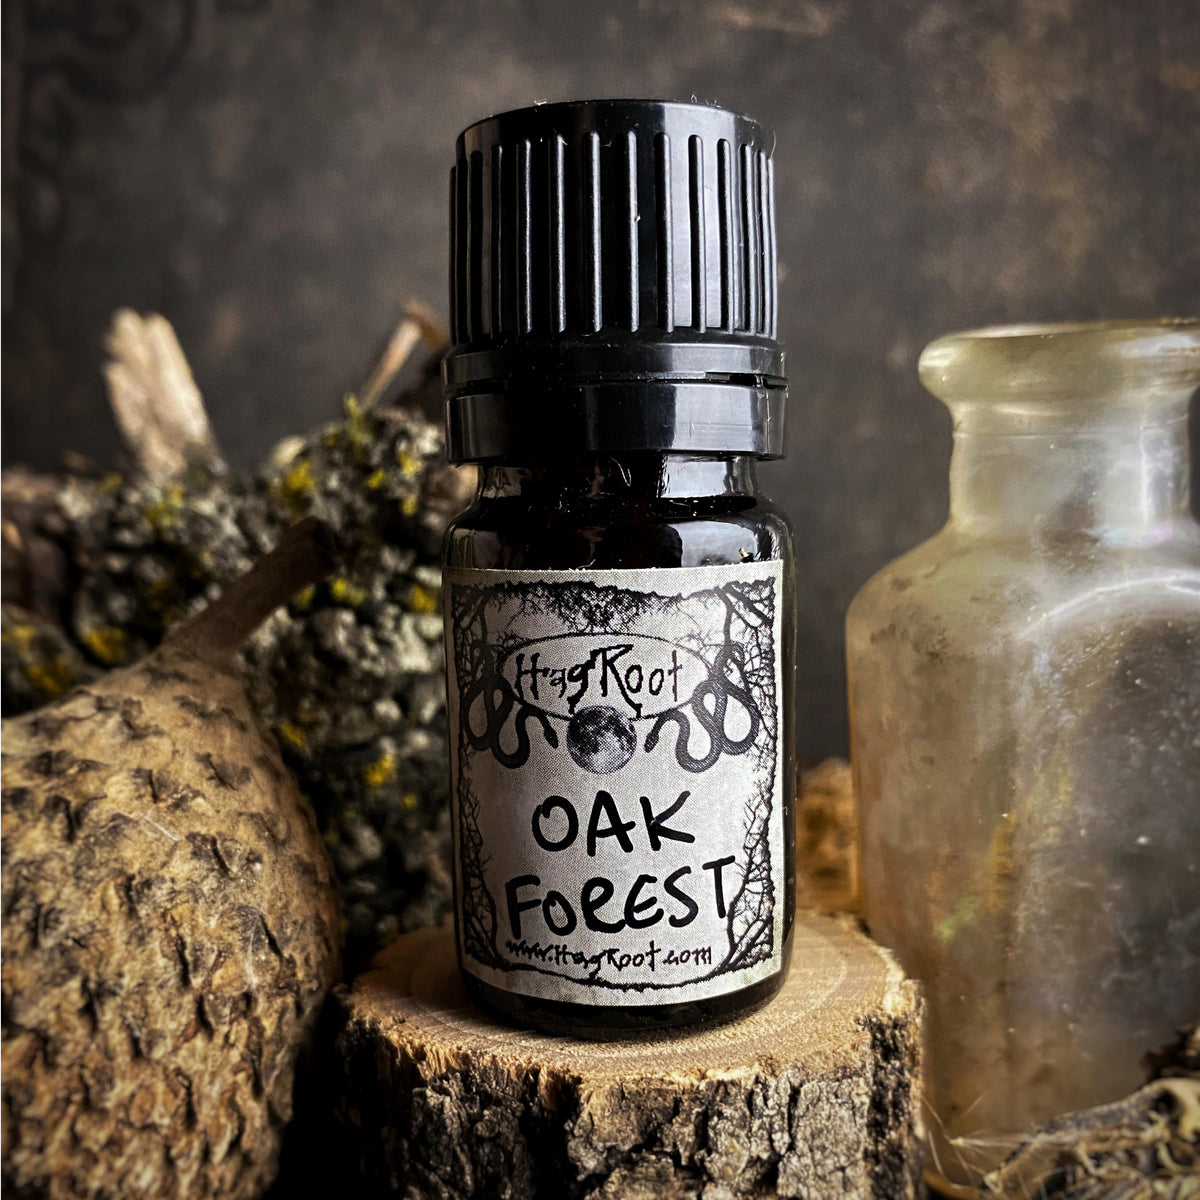 Wild Rose Dragons Blood Perfume Oil - Exotic Incense